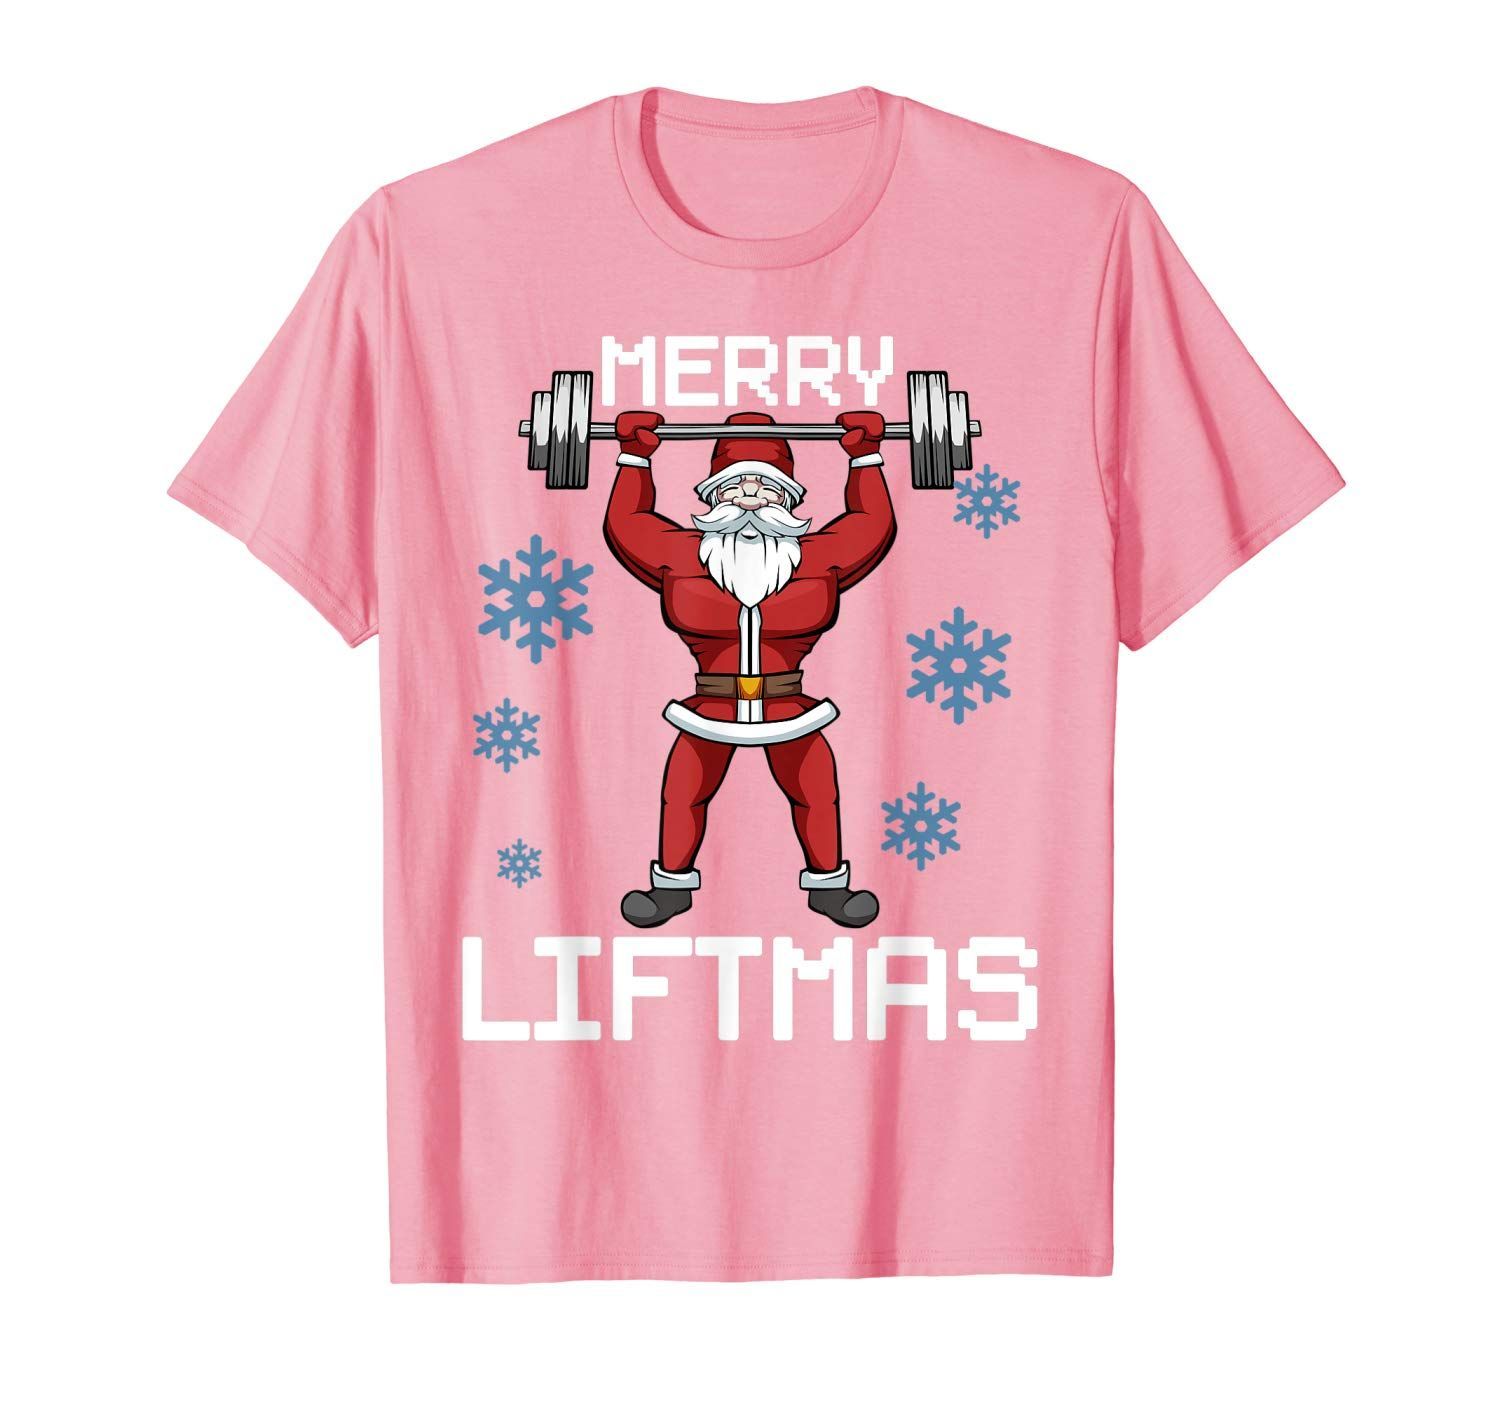 Merry Liftmas Funny Gym Weightlifting Christmas Fitness Diet T-Shirt - Merry Liftmas Funny Gym Weightlifting Christmas Fitness Diet T-Shirt -   14 christmas fitness Humor ideas